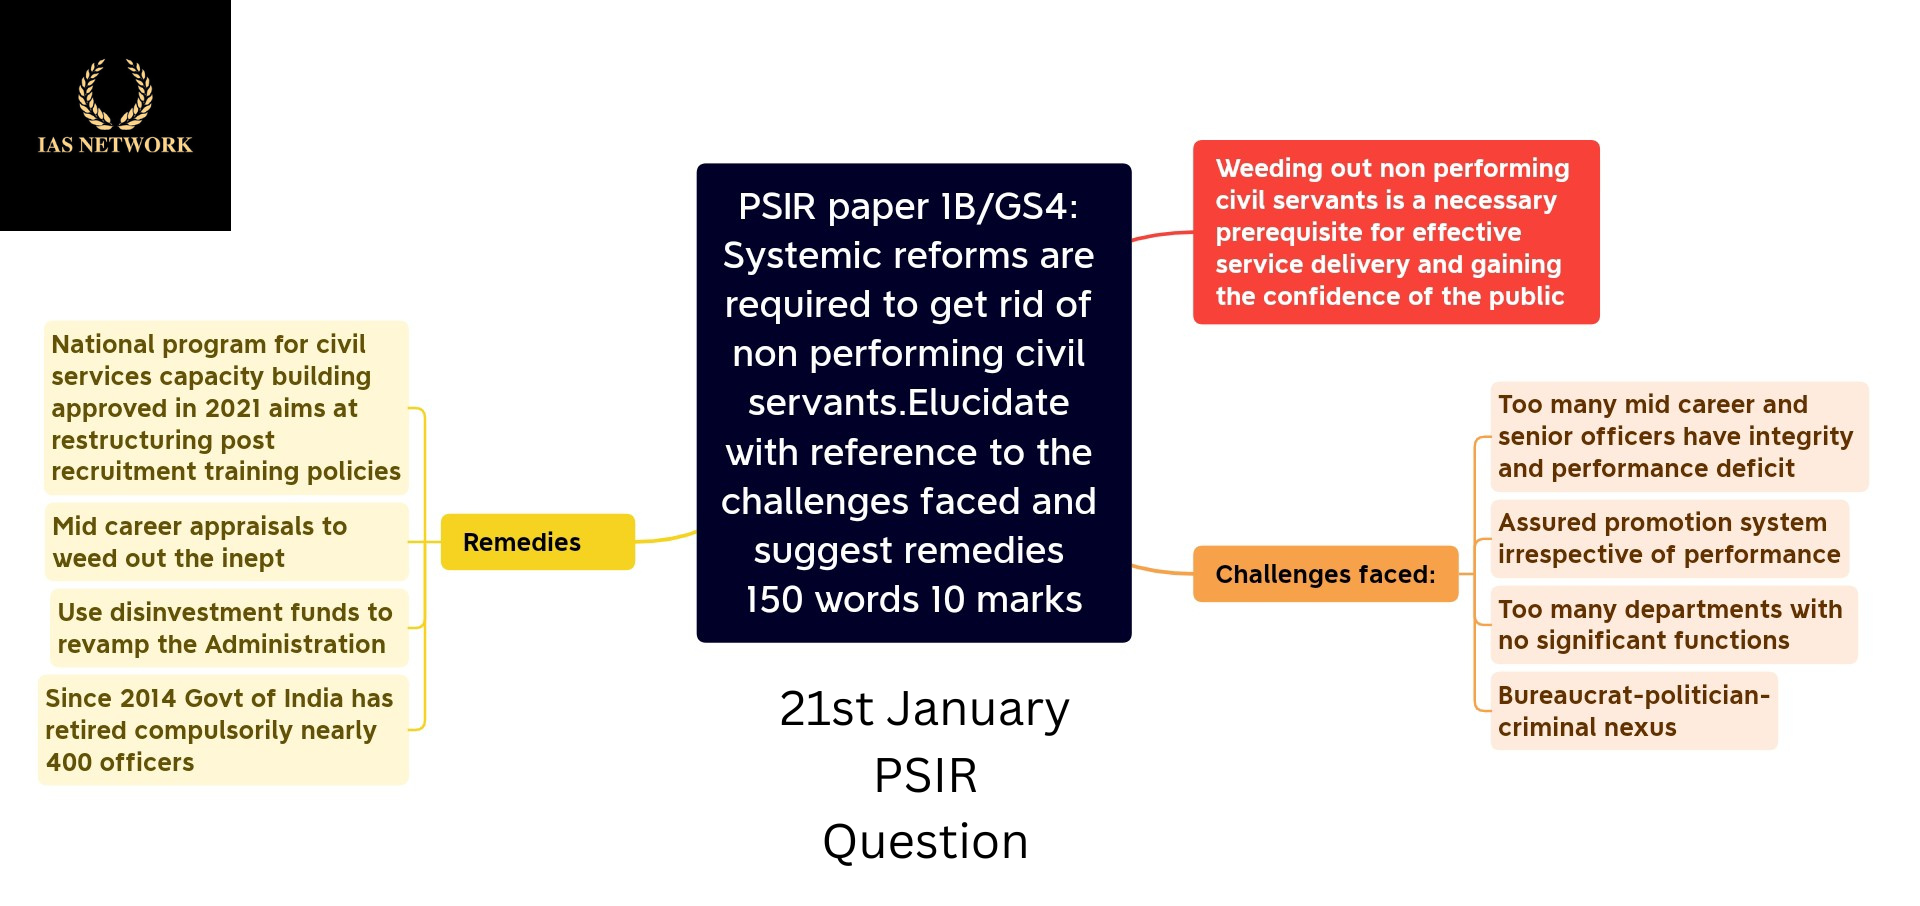 IAS NETWORK 21st JANUARY PSIR QUESTION